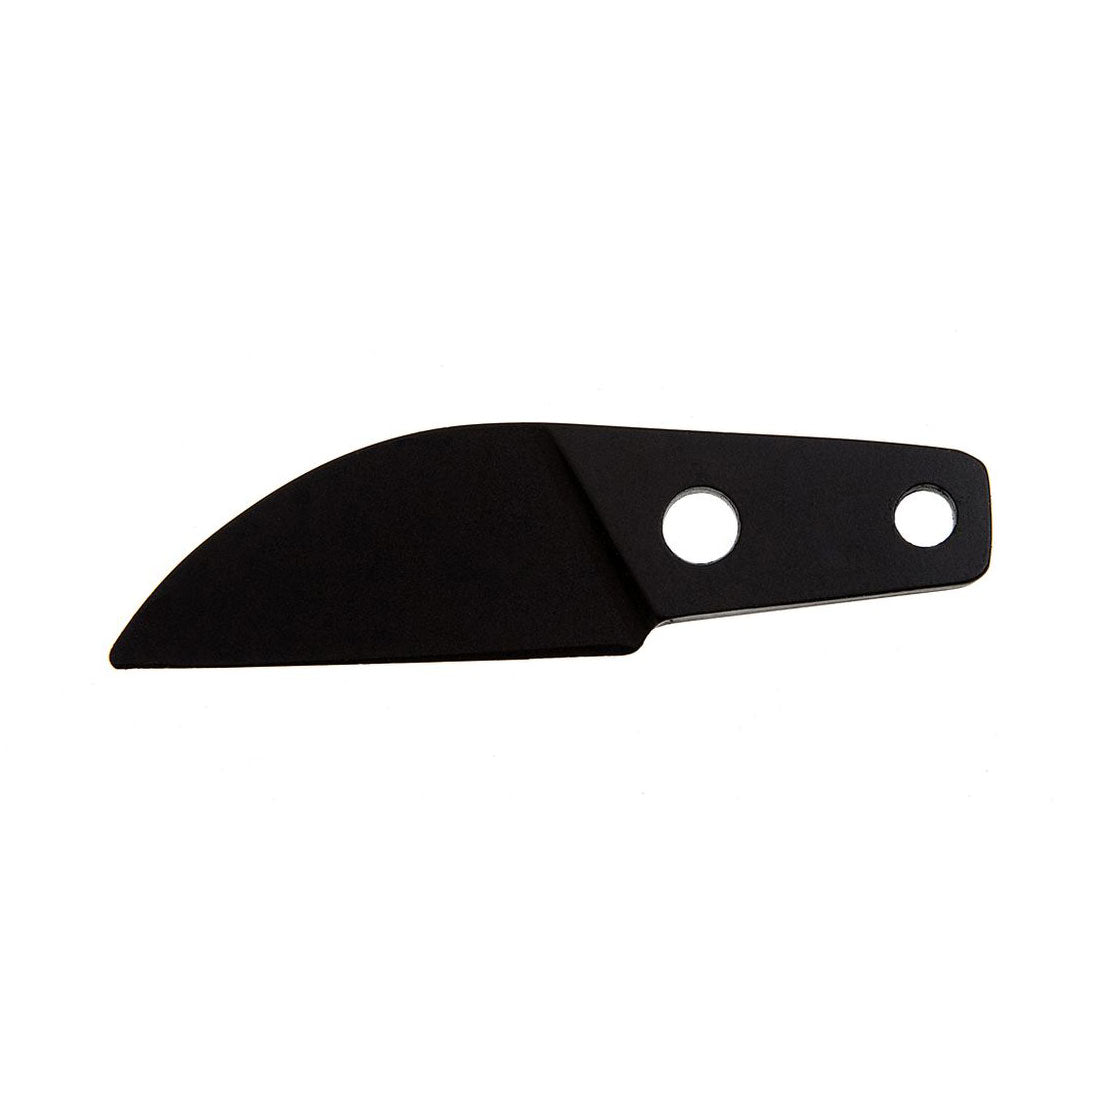 Berger 91601 Blade for 1902